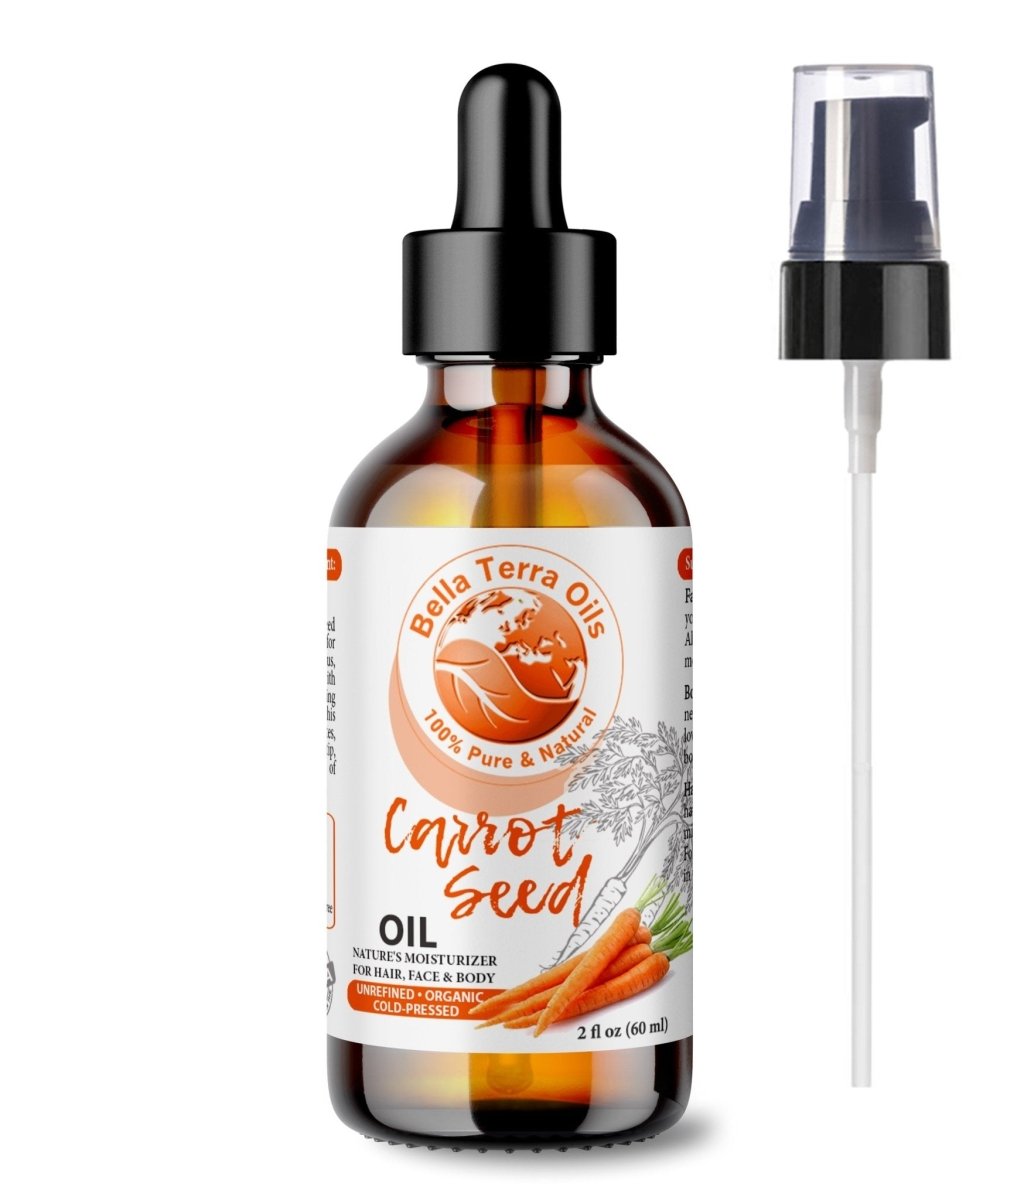 Carrot Seed Oil - For Natural Skin Care Routines